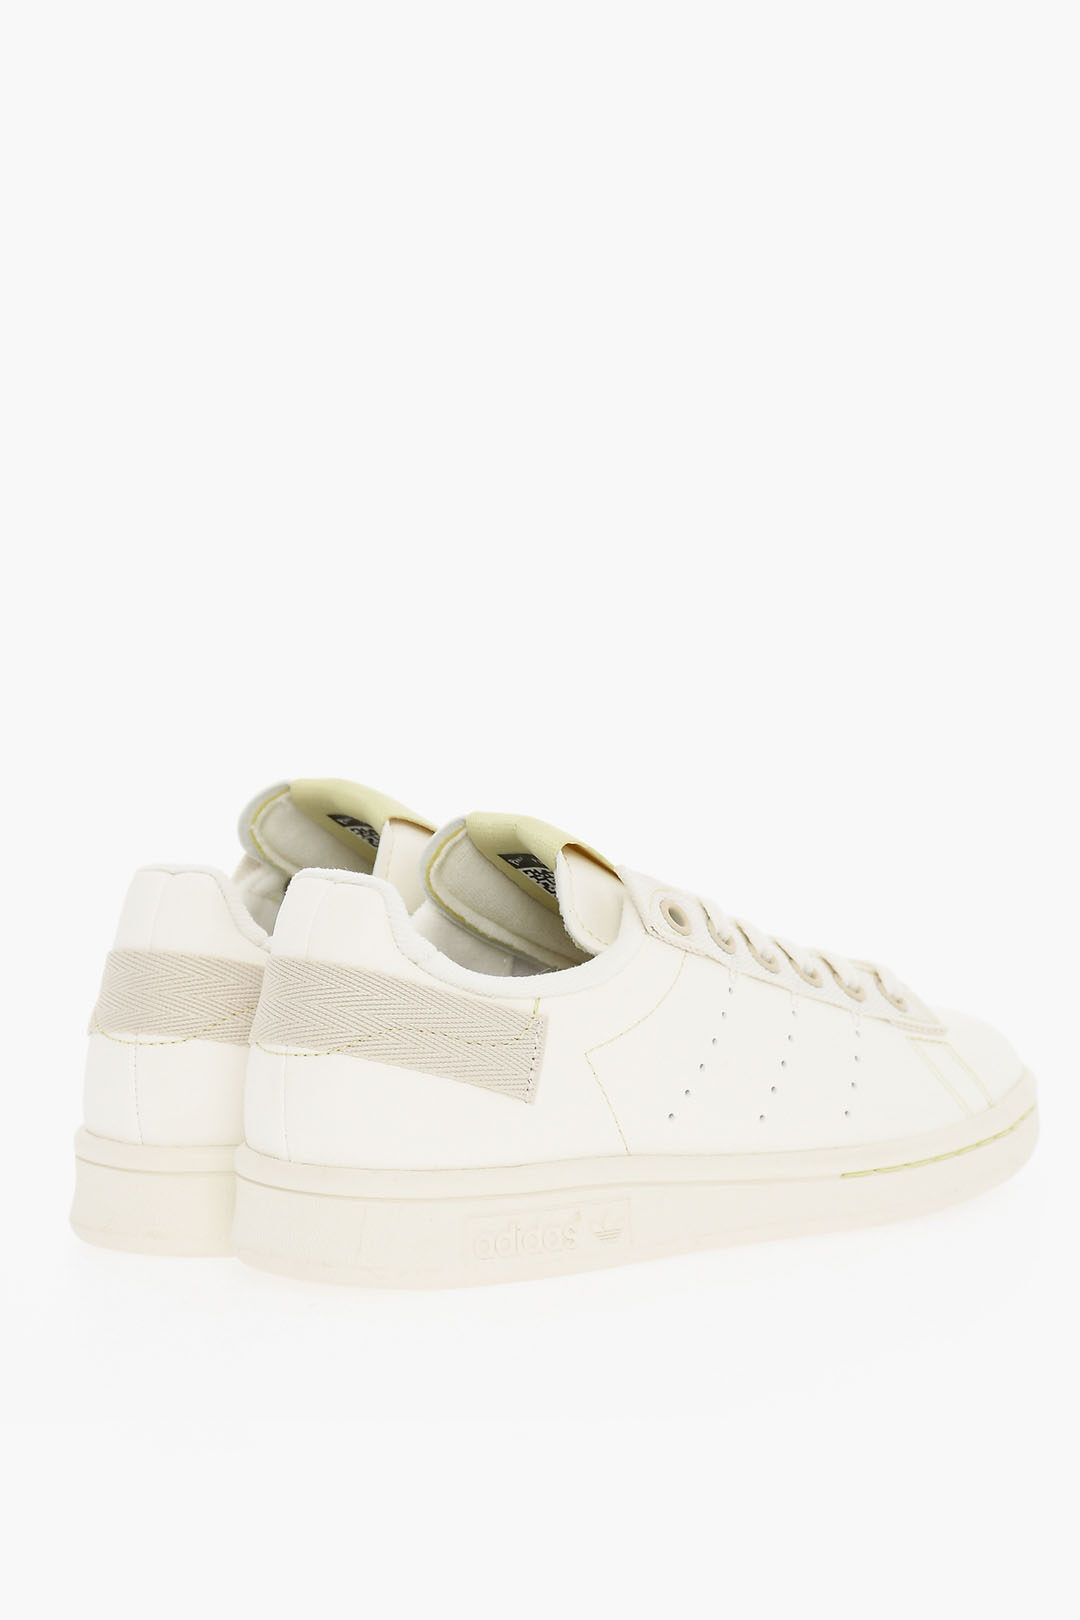 Adidas PARLEY Low-top STAN SMITH Sneakers With Rubber Sole men ...